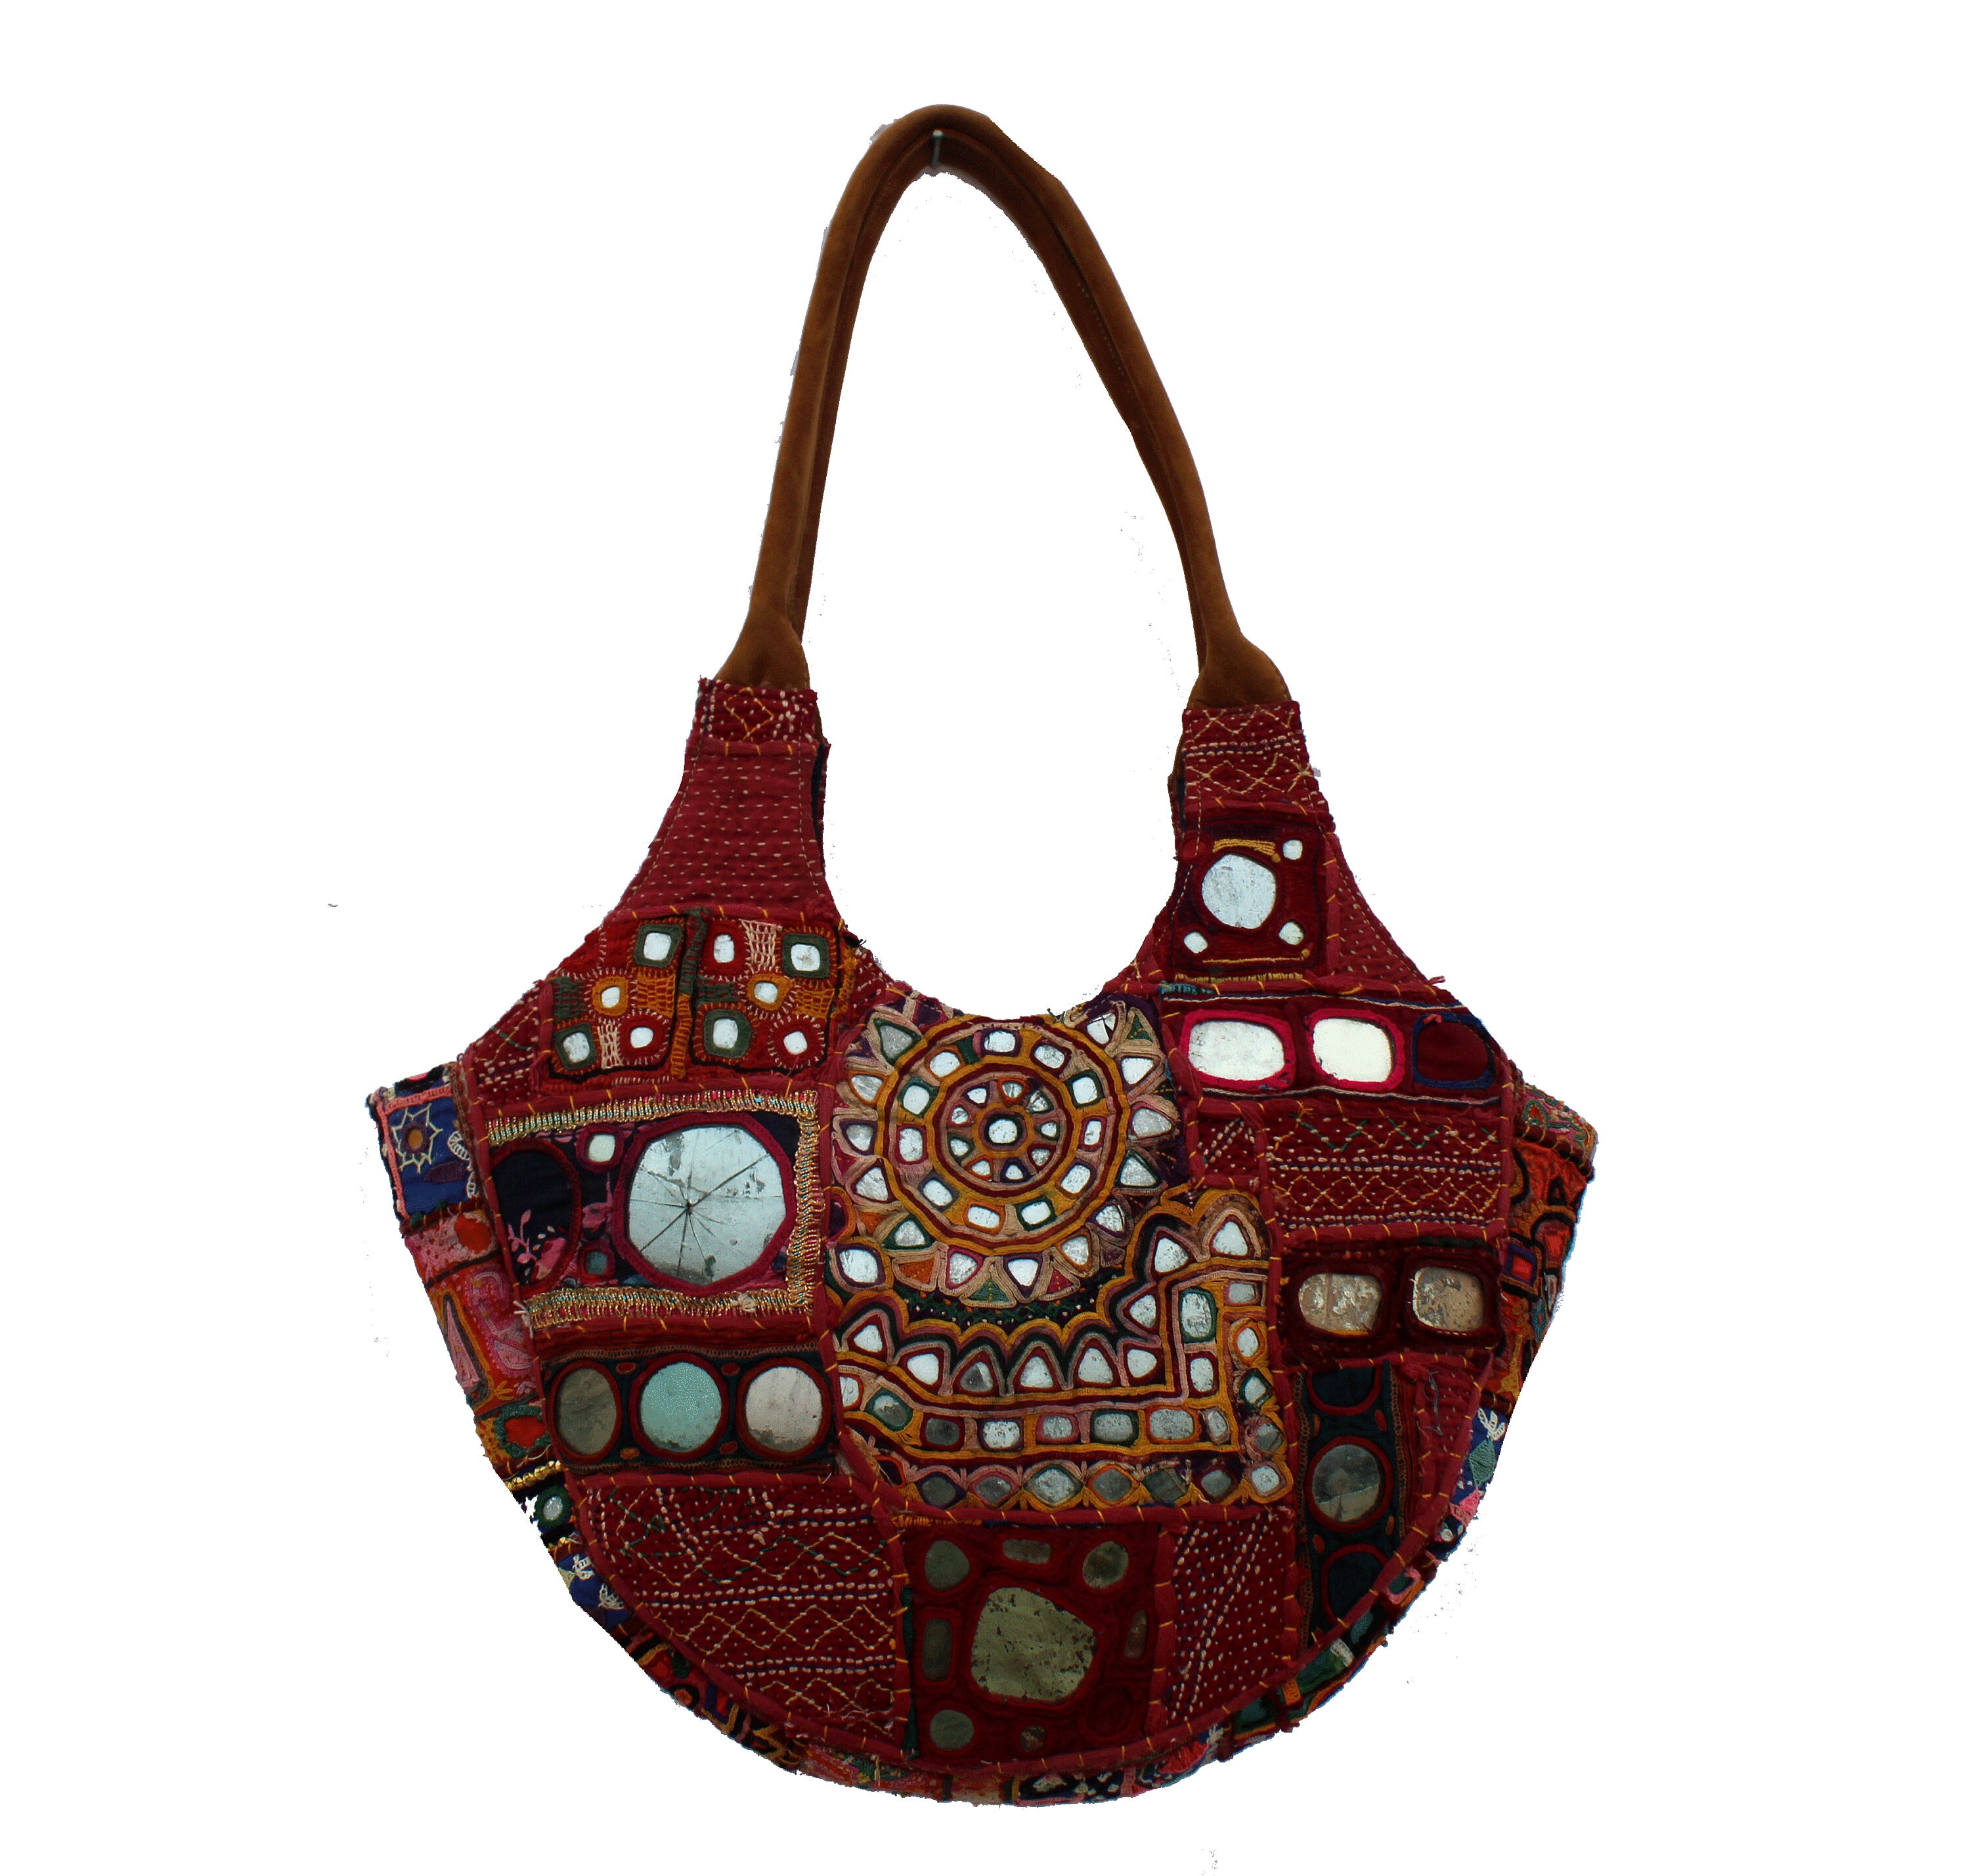 Kutch Embroidery Bags - Buy Kutch Leather Shoulder Bags Online l iTokri  आई.टोकरी